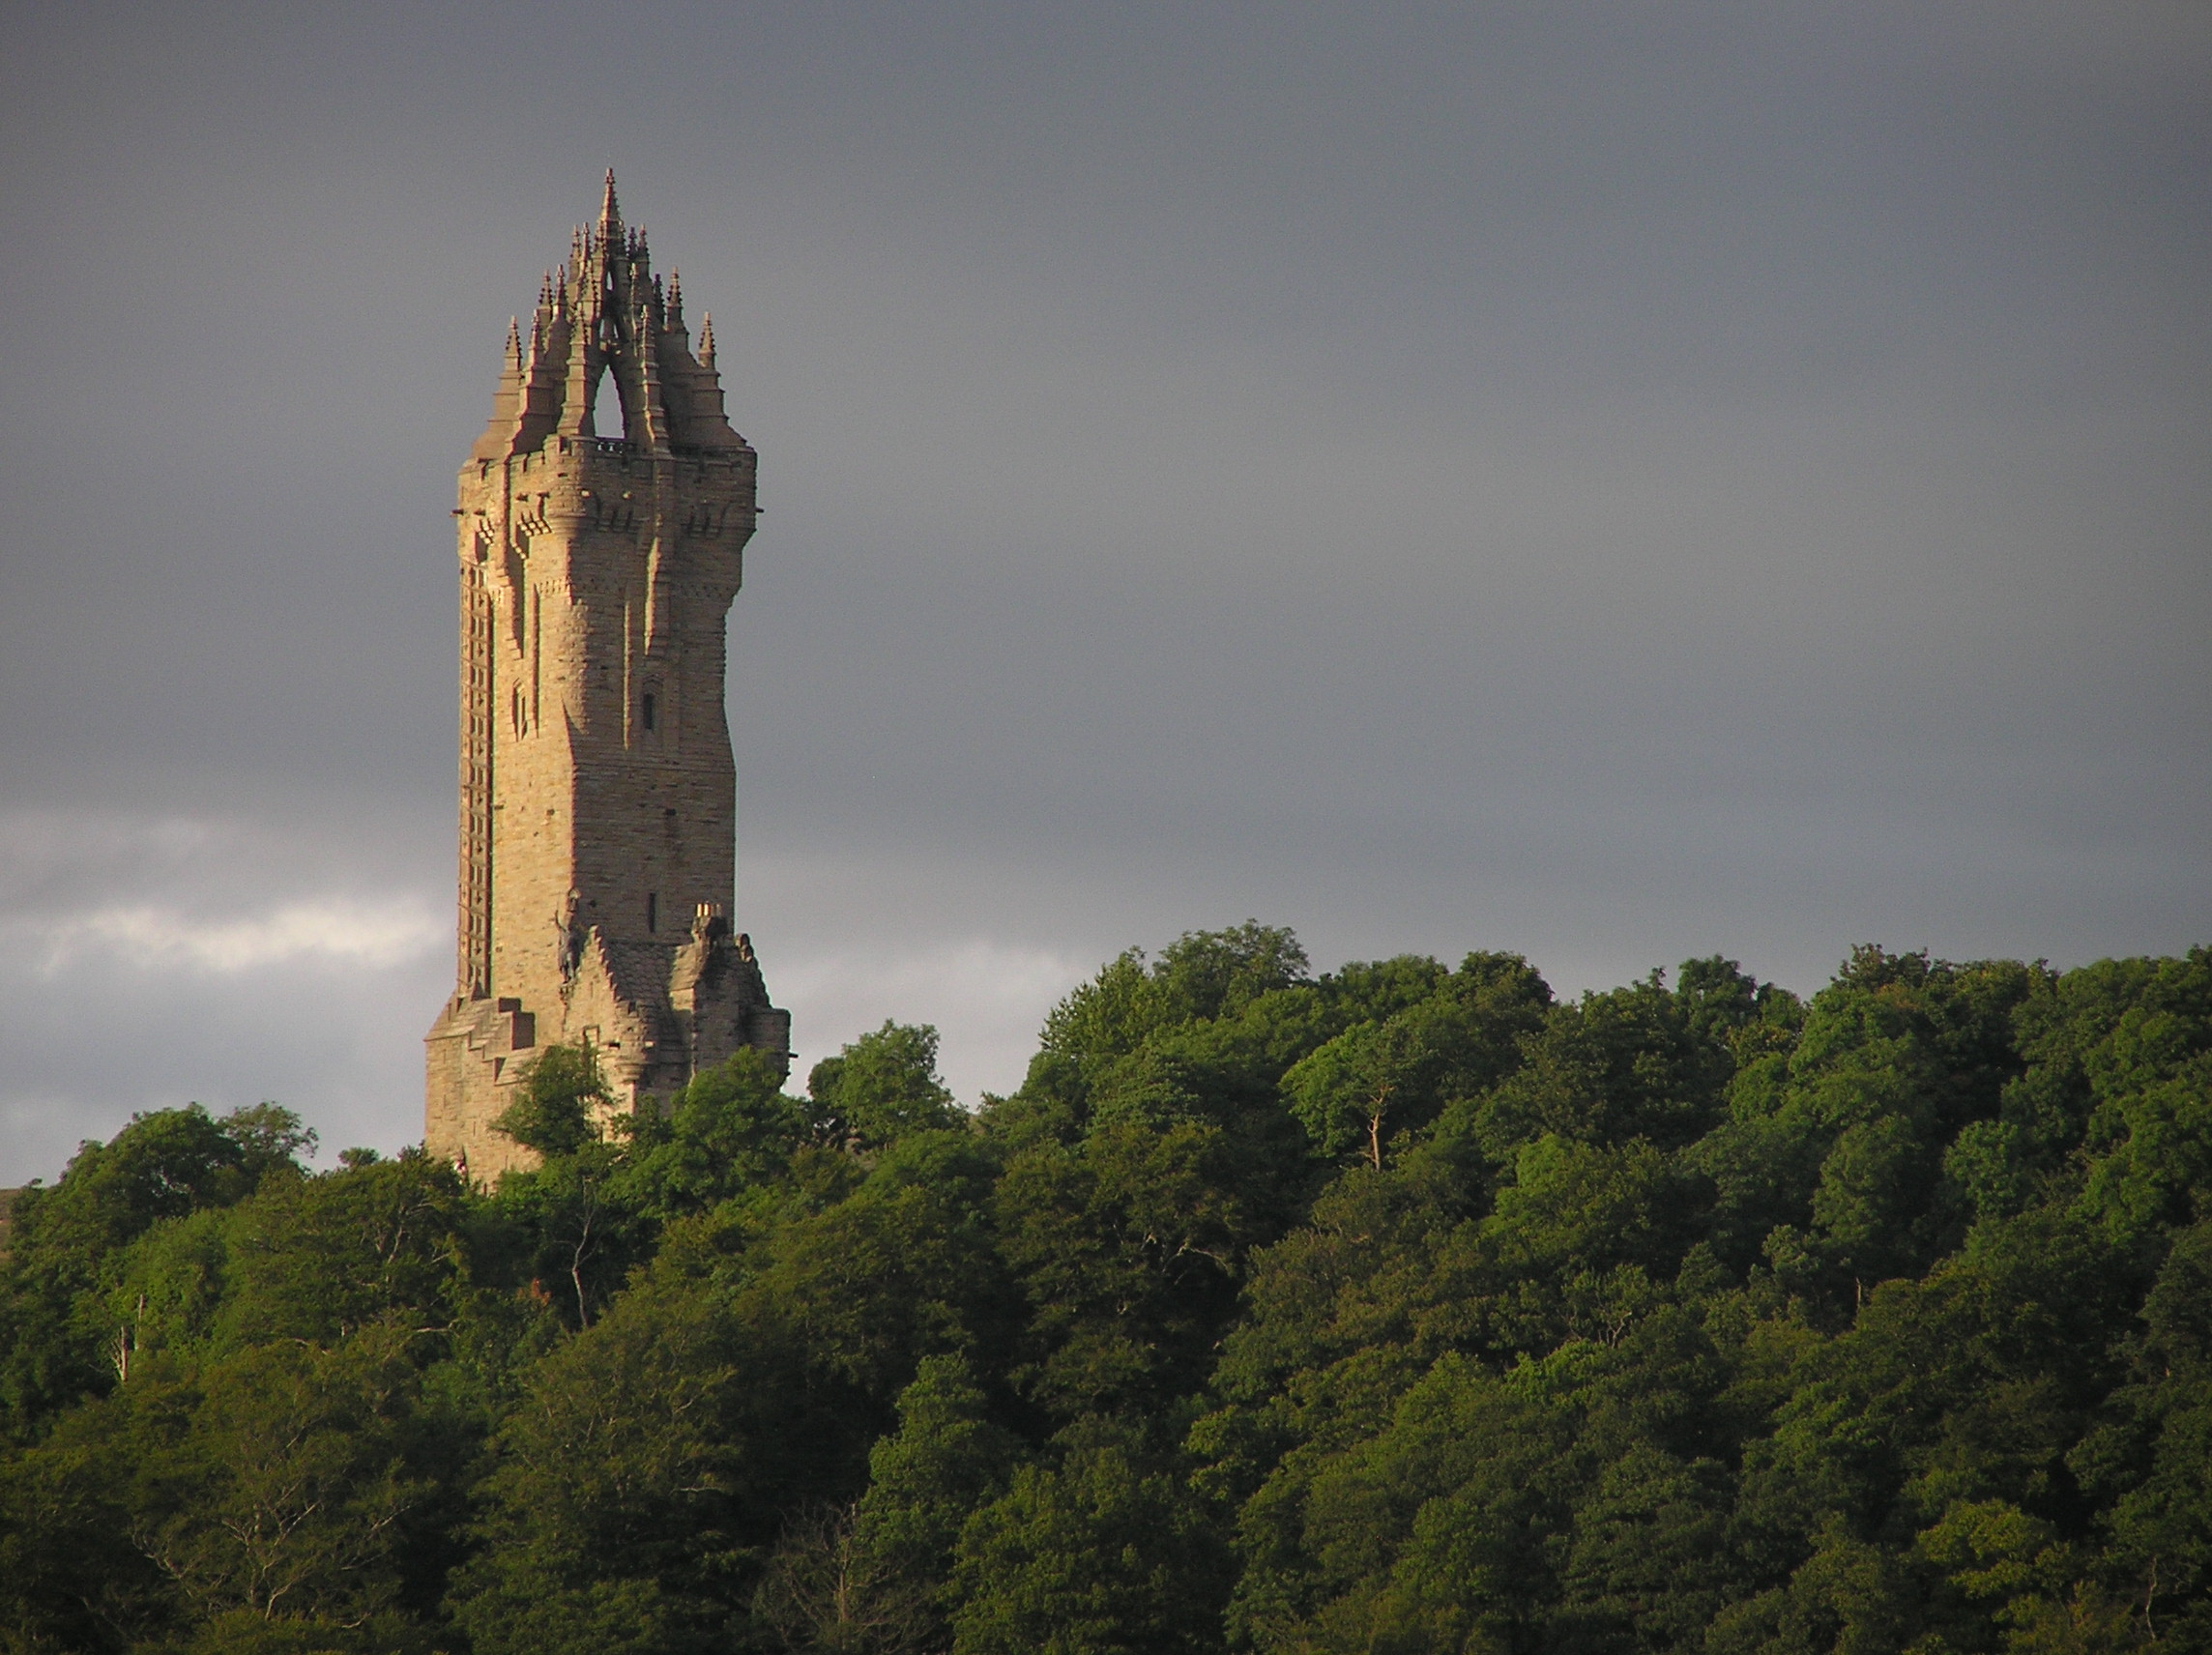 The National Wallace Monument HD Wallpaper Background Image